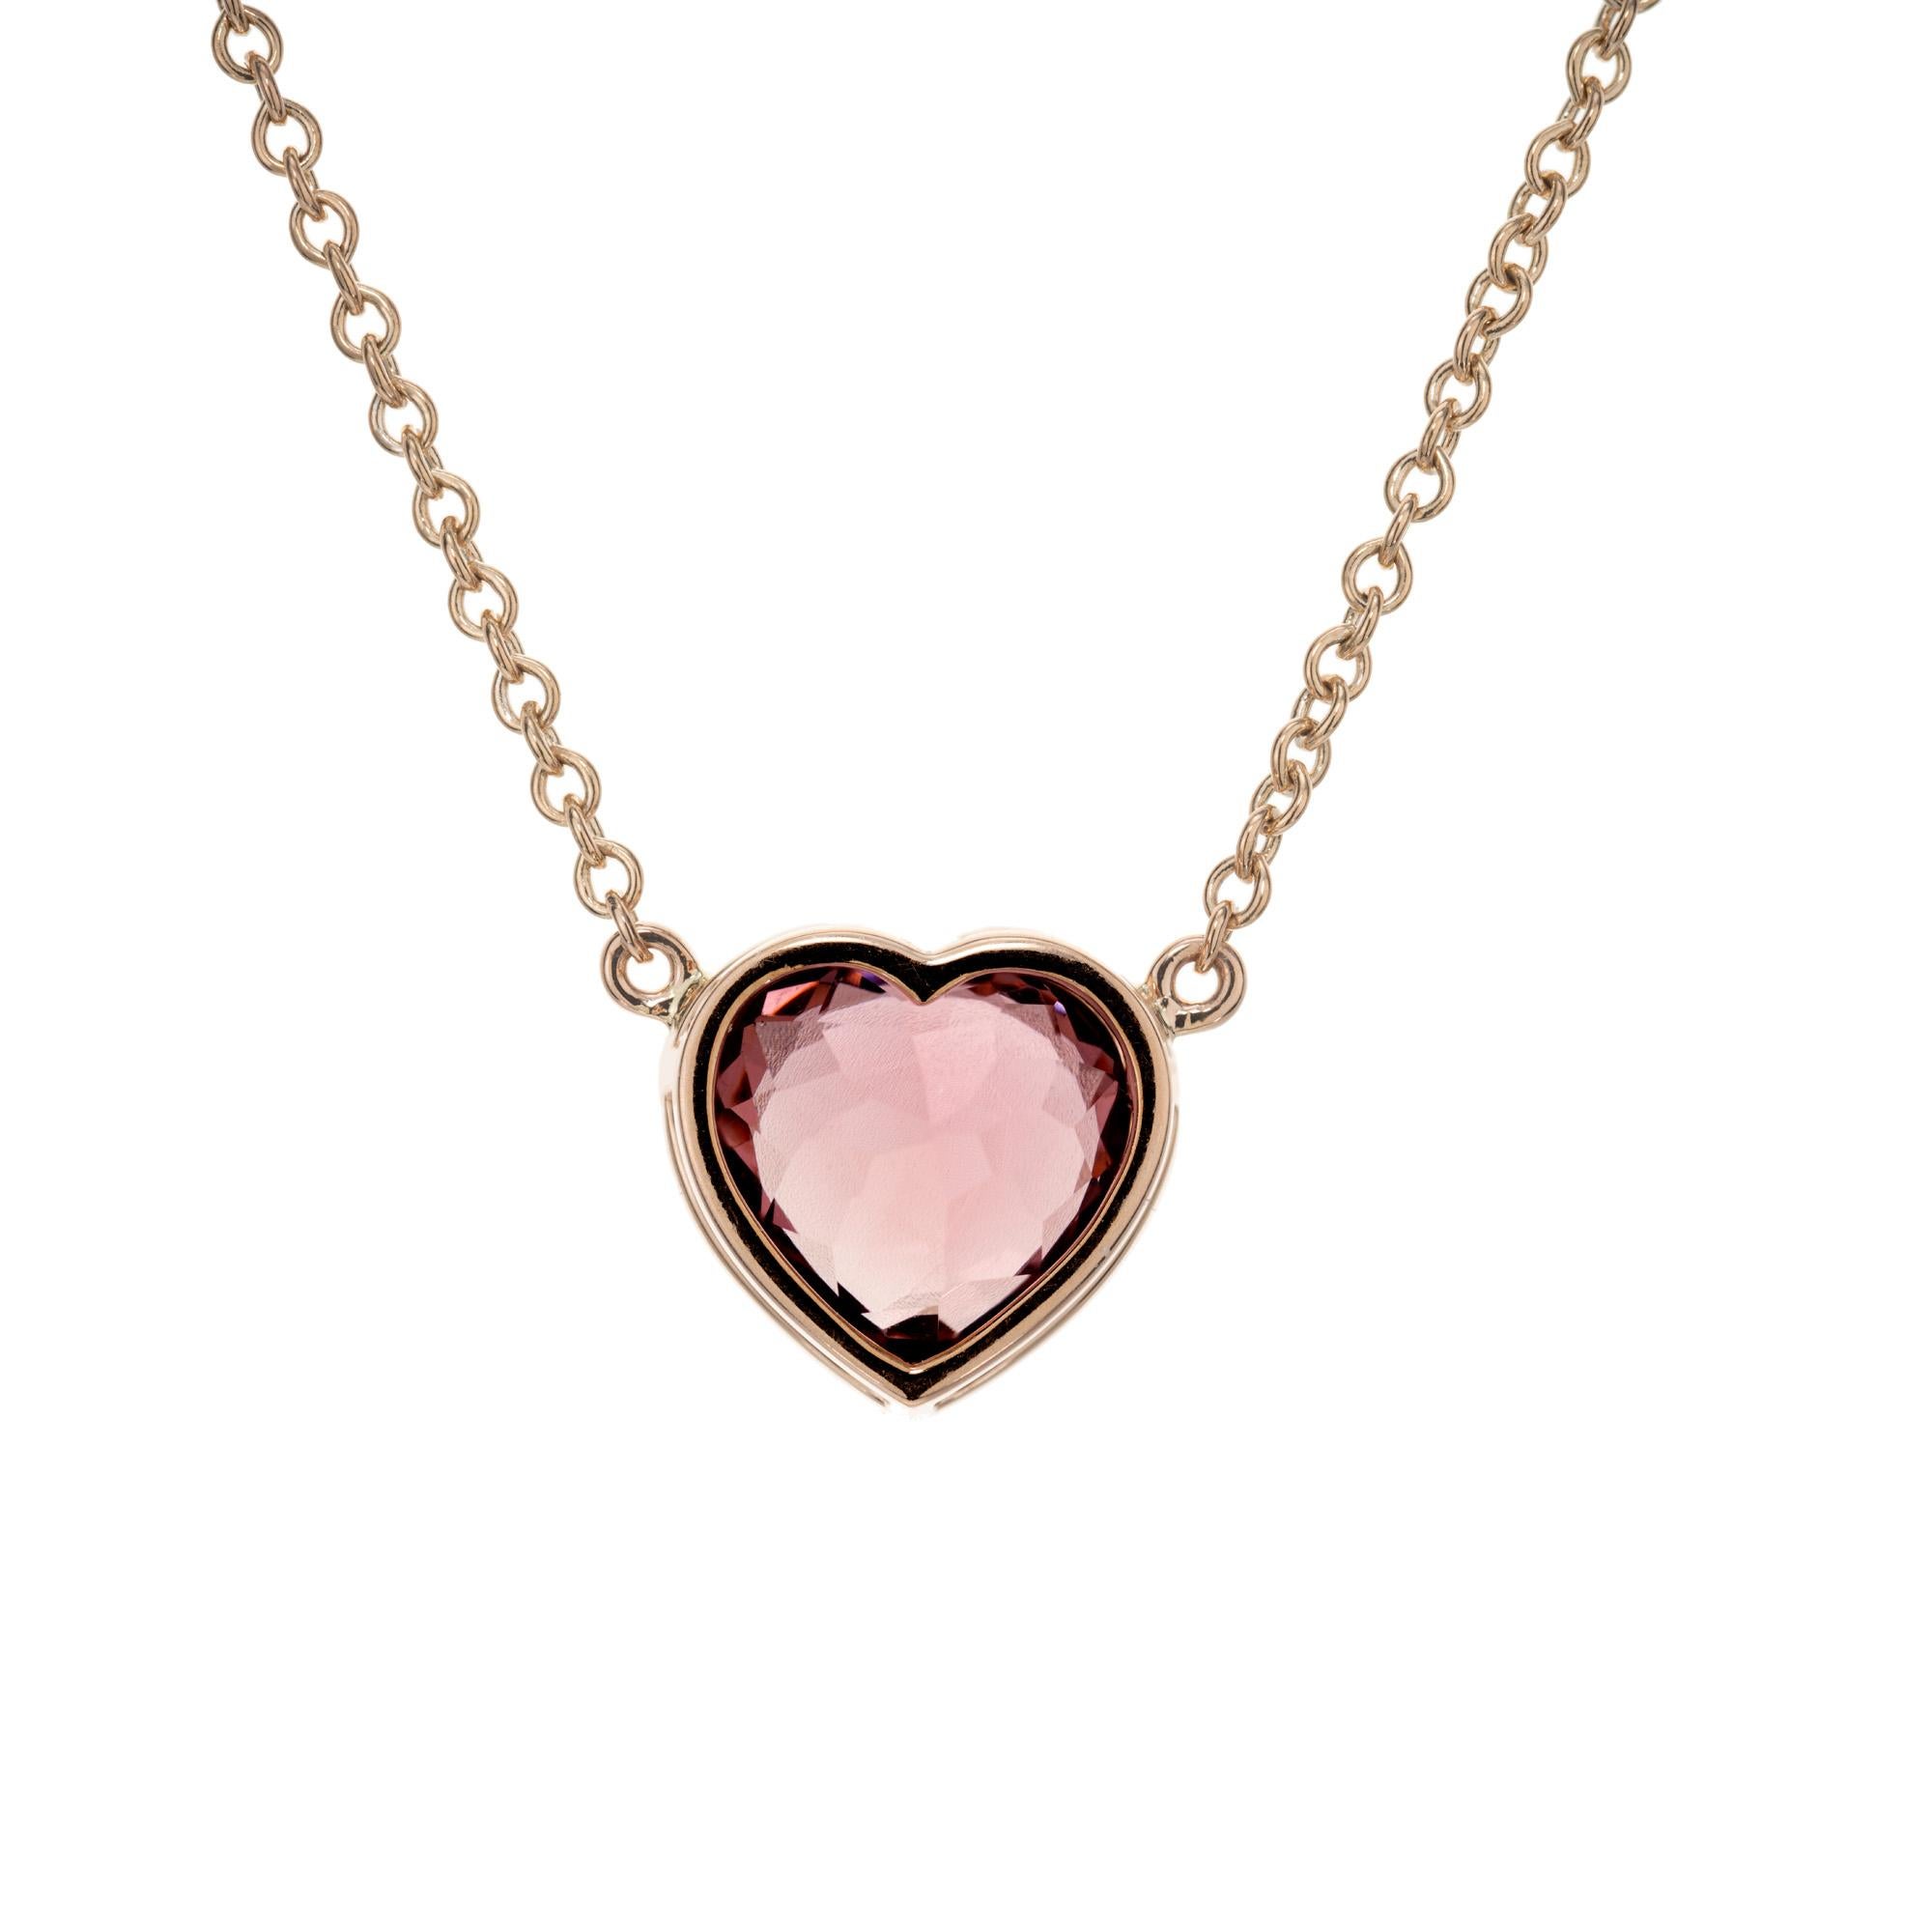 Peter Suchy 3.29 Carat Pink Tourmaline Rose Gold Heart Pendant Necklace In New Condition For Sale In Stamford, CT